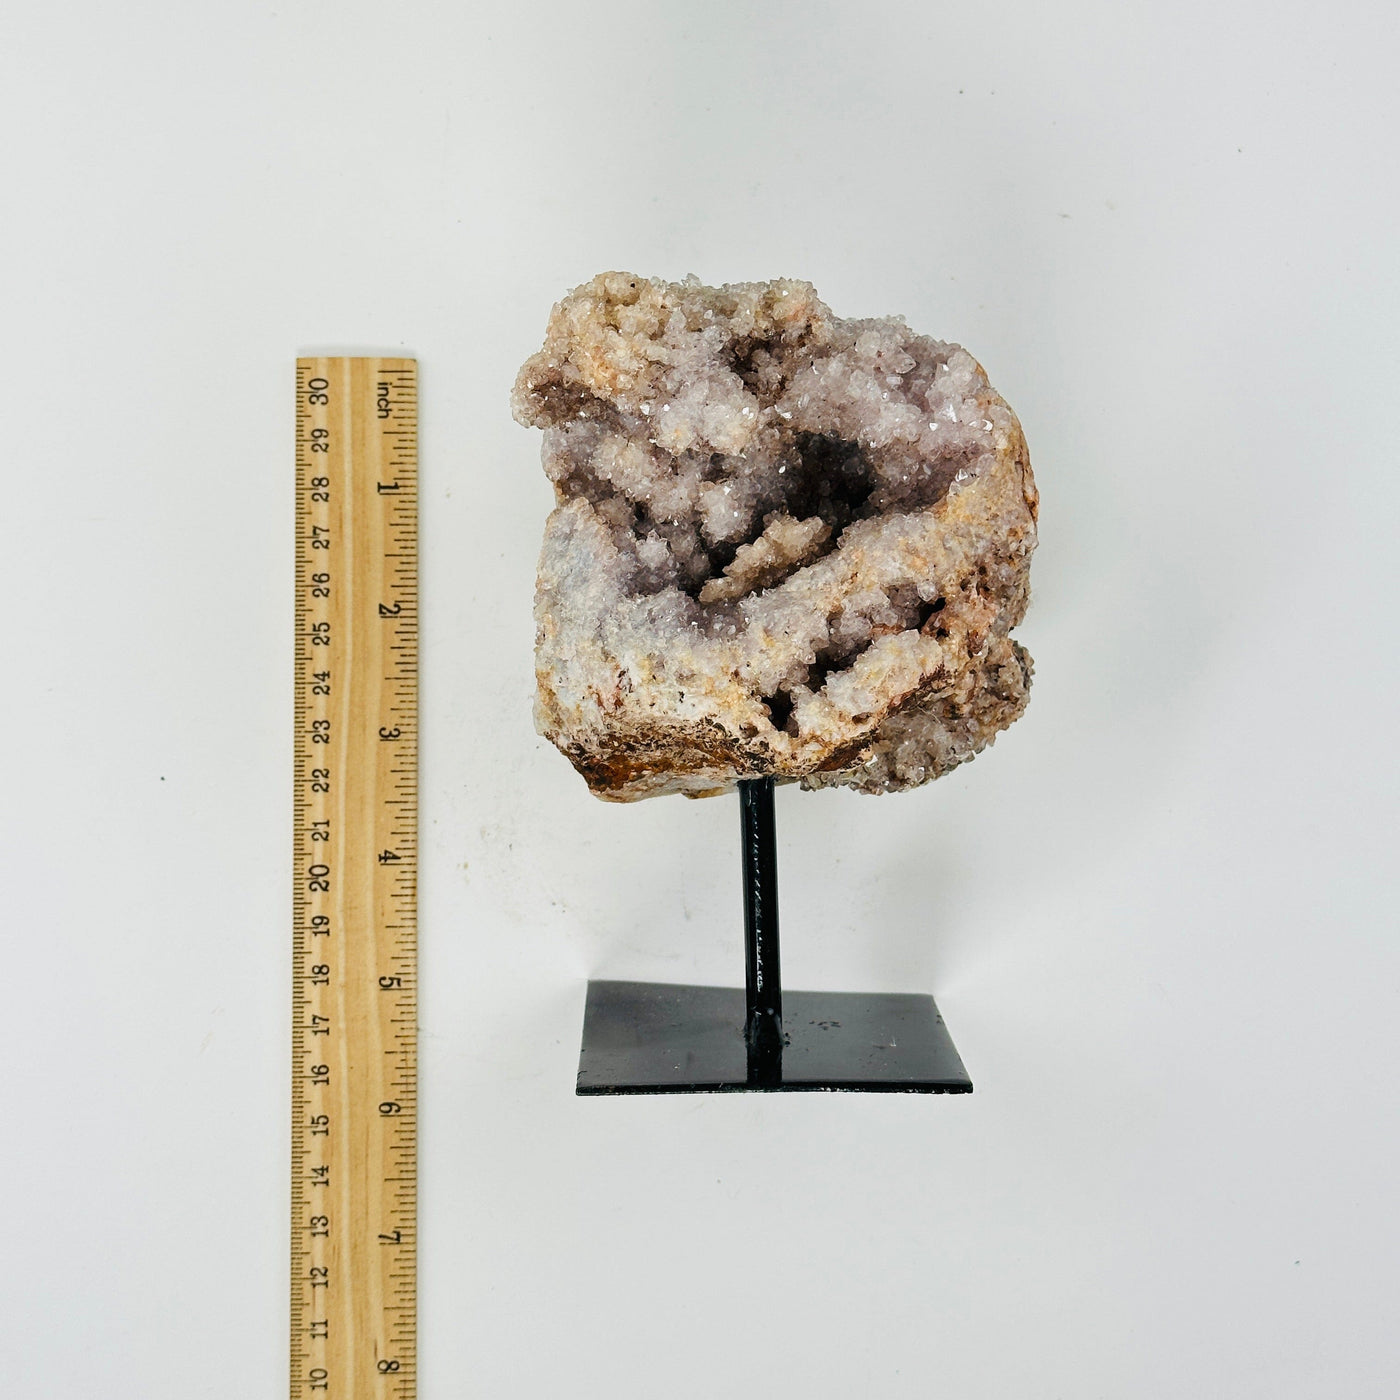 raw pink amethyst on metal stand next to a ruler for size reference